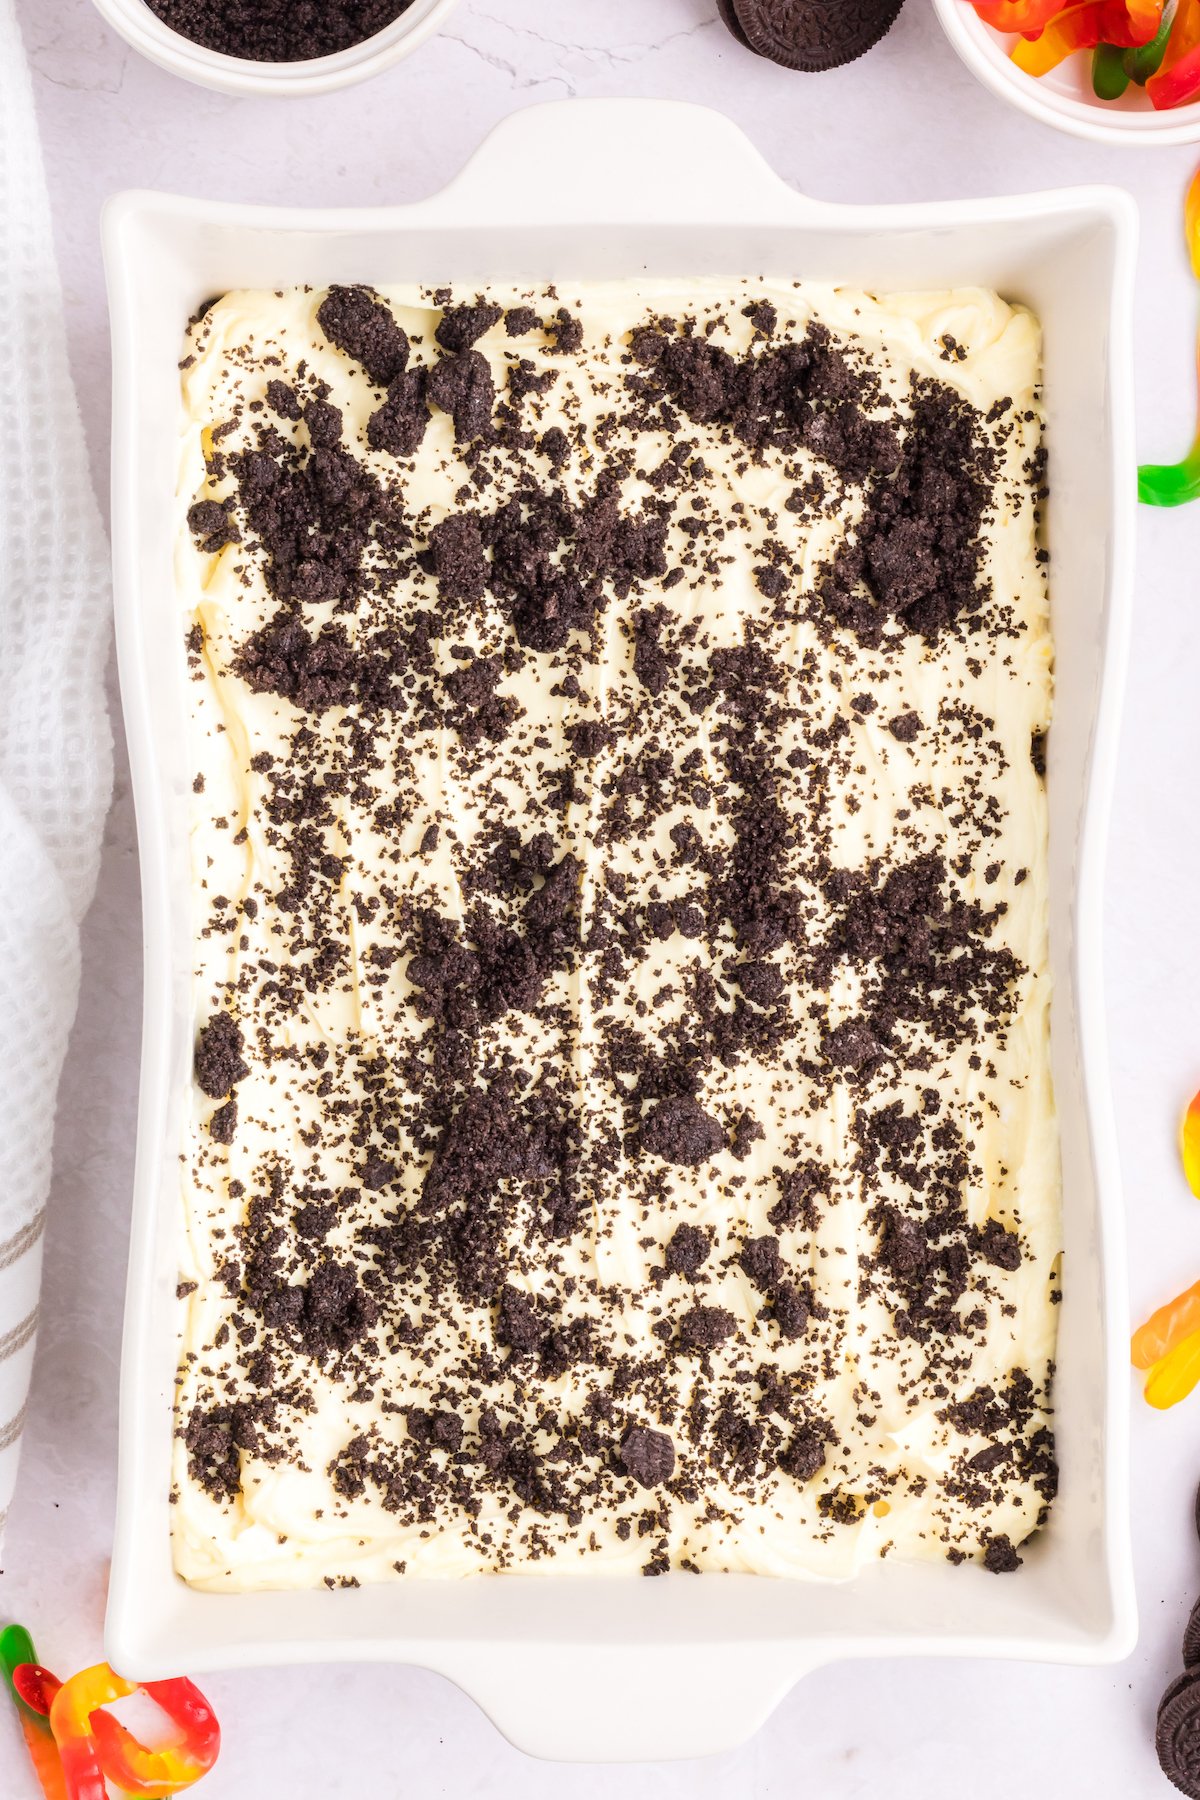 An Oreo dirt cake in a 9x13 pan that has been topped with cookie crumbles.